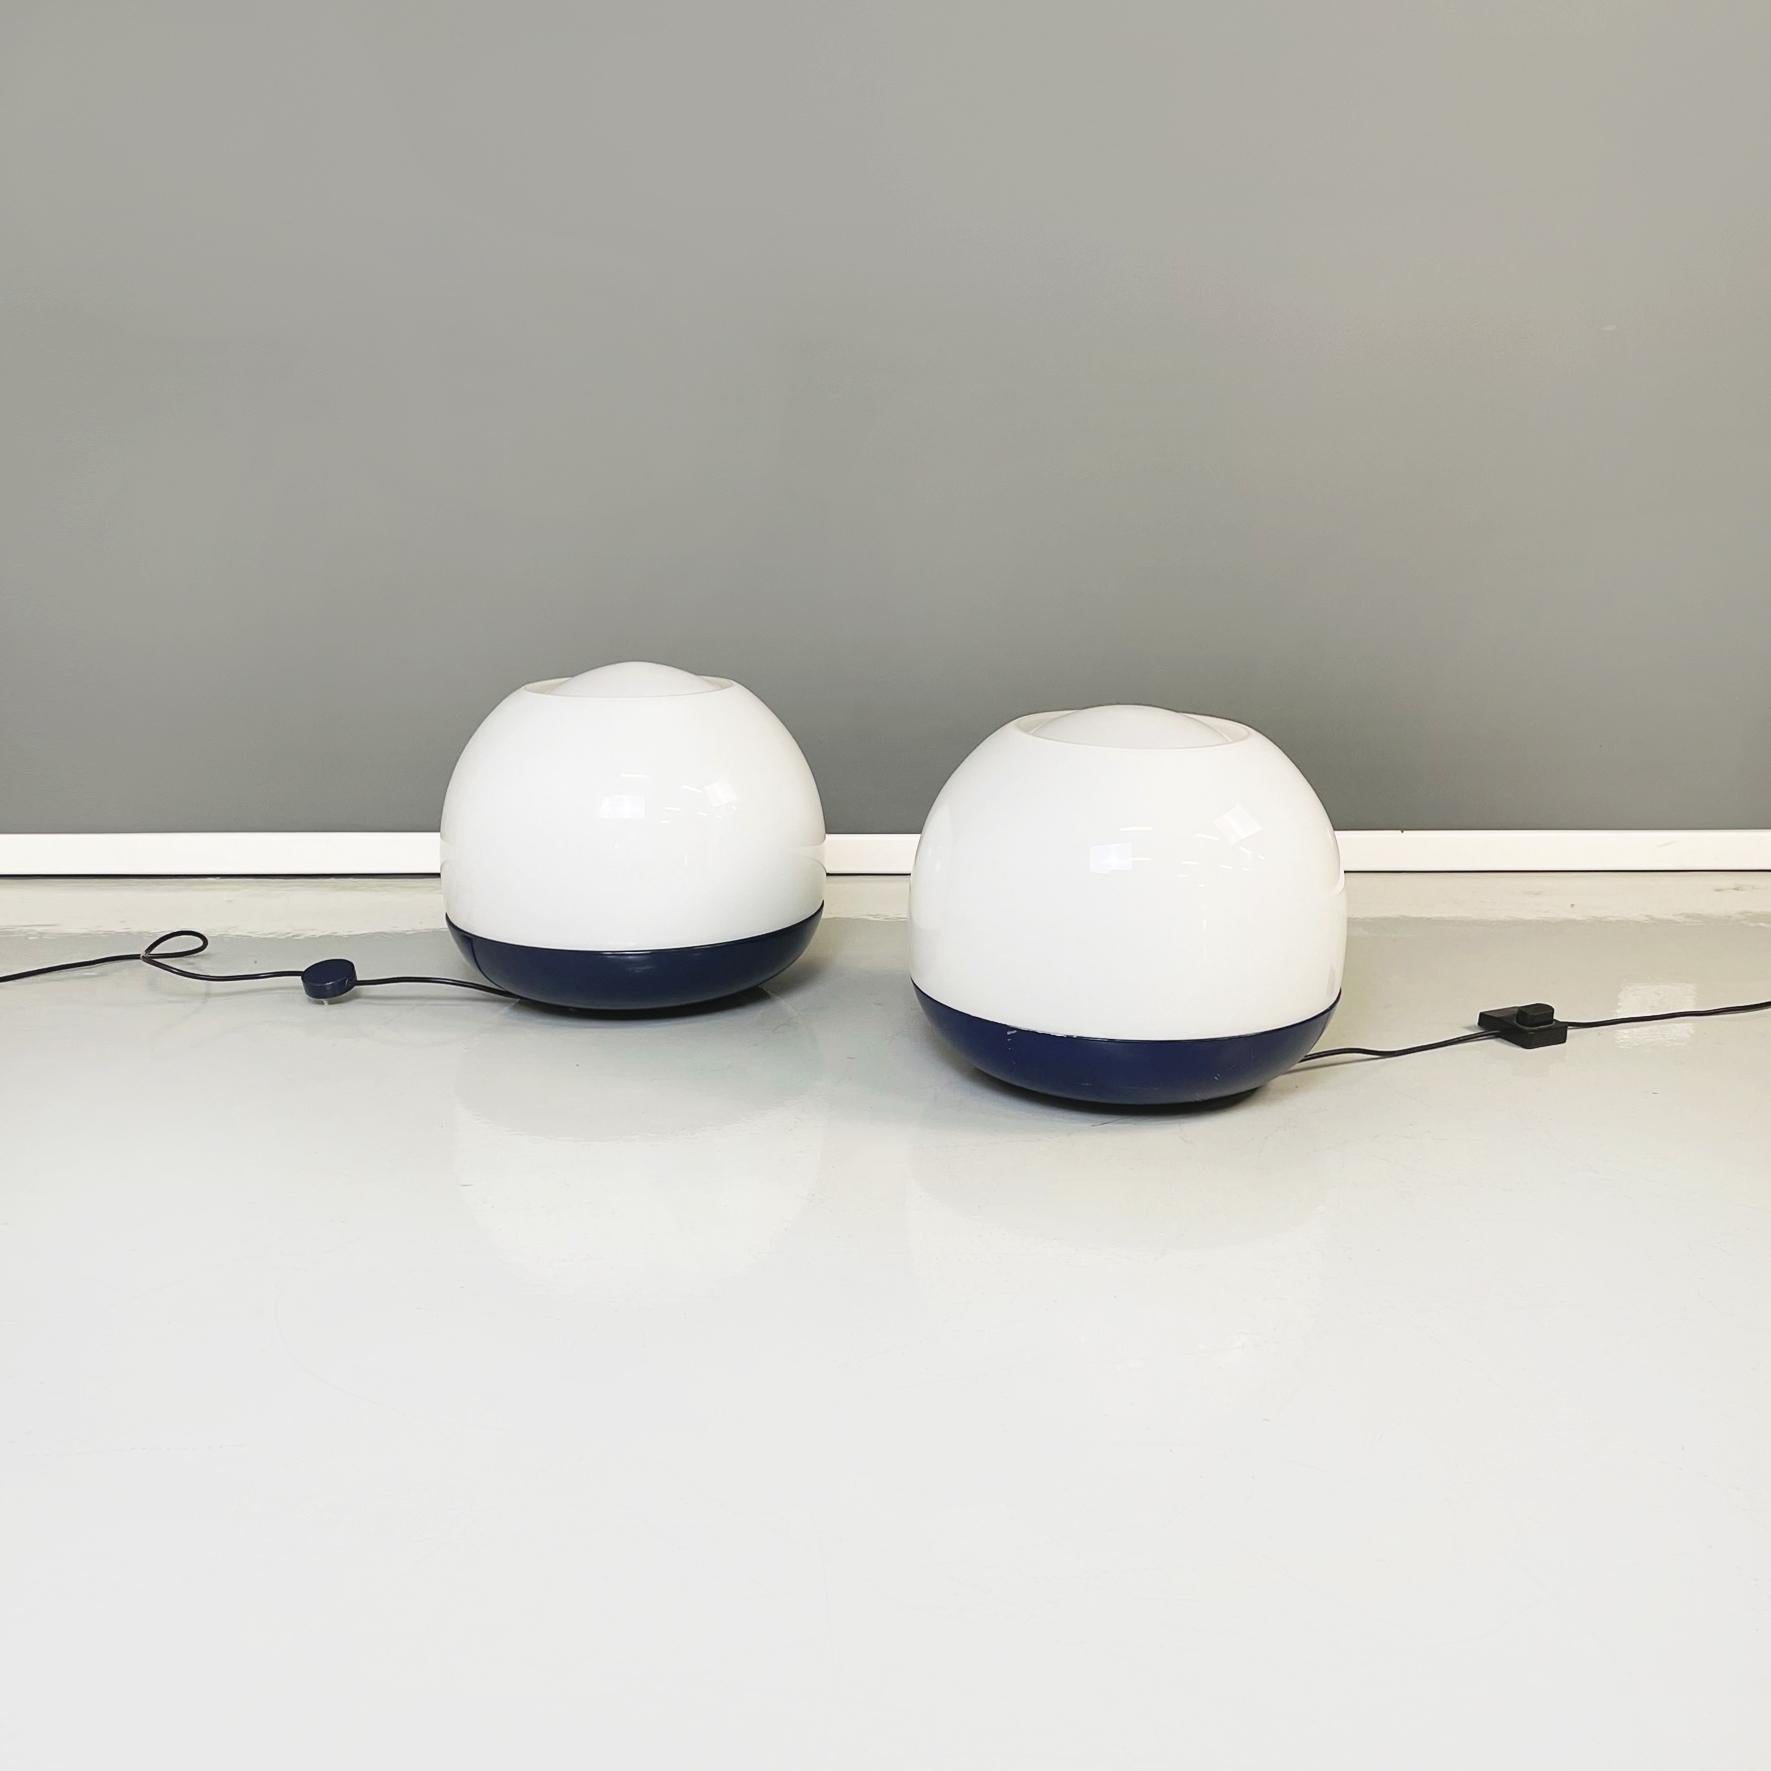 Italian mid-century modern Table lamps Platea by Leonardo Ferrari and Franco Mazzucchelli Tartaglino for Artemide, 1970s
Pair of fantastic large floor lamps mod. Platea with round base in dark blue metal. The lampshade is made up of two opaline